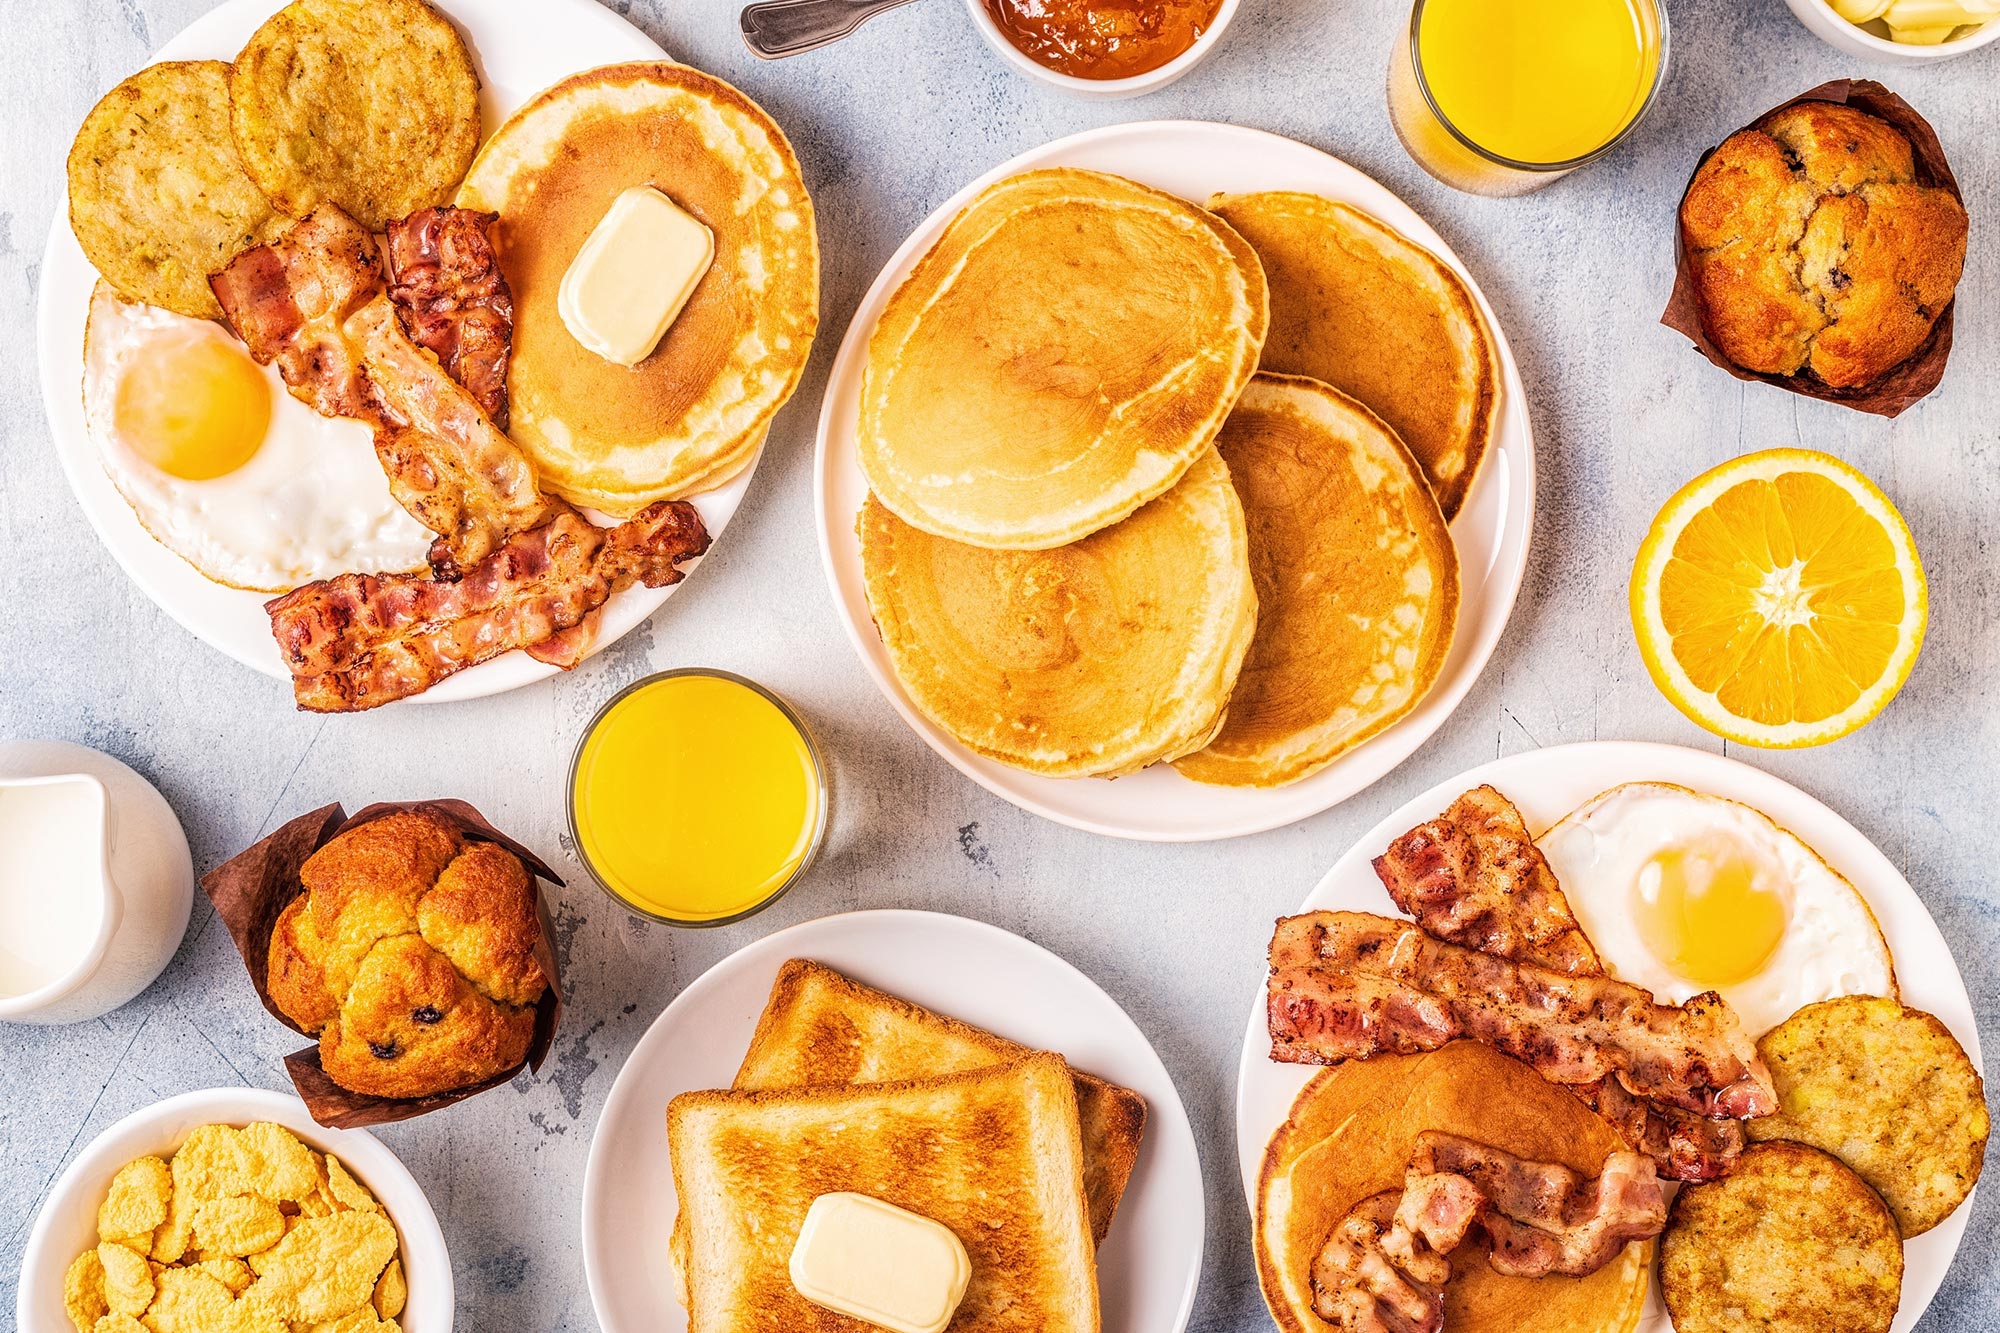 Stunning Investigate Conclusions on Huge Breakfasts, Starvation, and Fat Decline